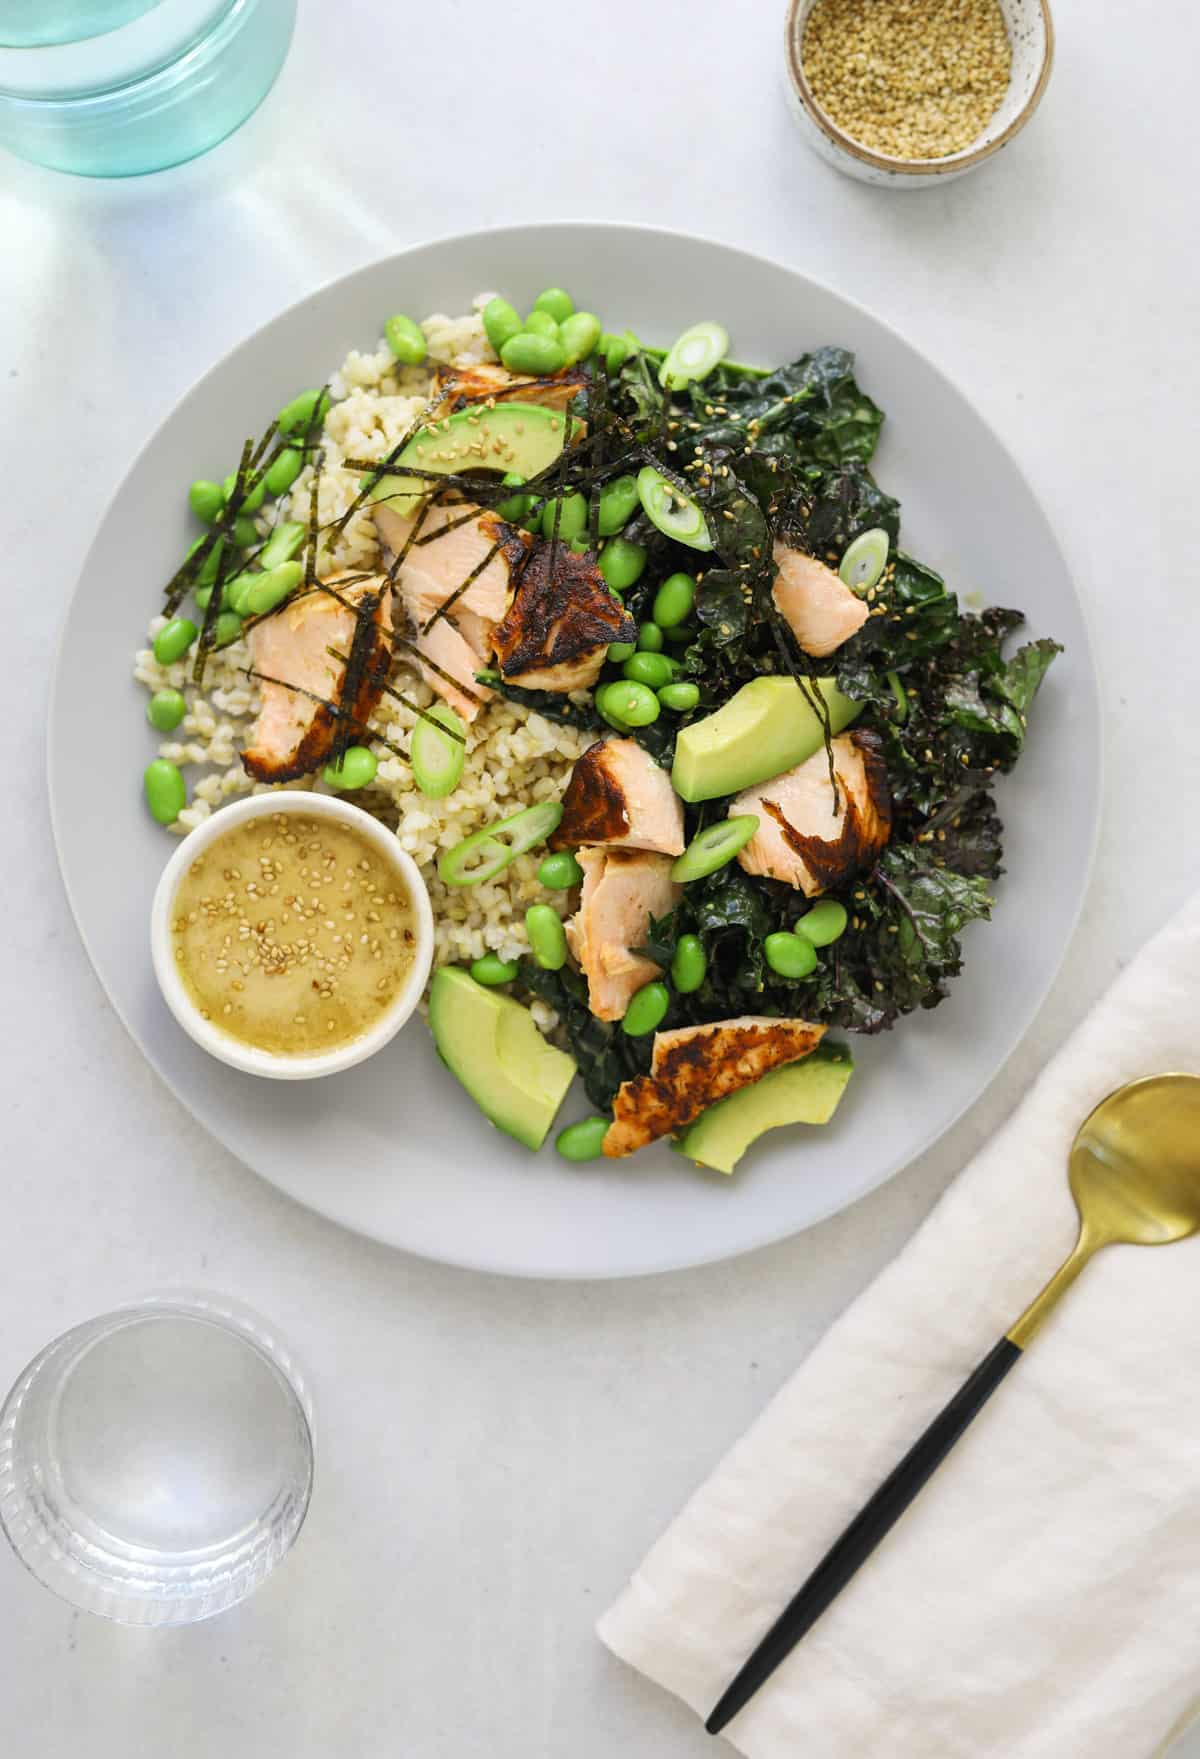 a light grey plate filled with brown rice, kale, avocado and salmon salad on a blue background with a gold and black spoon and white linen napkin